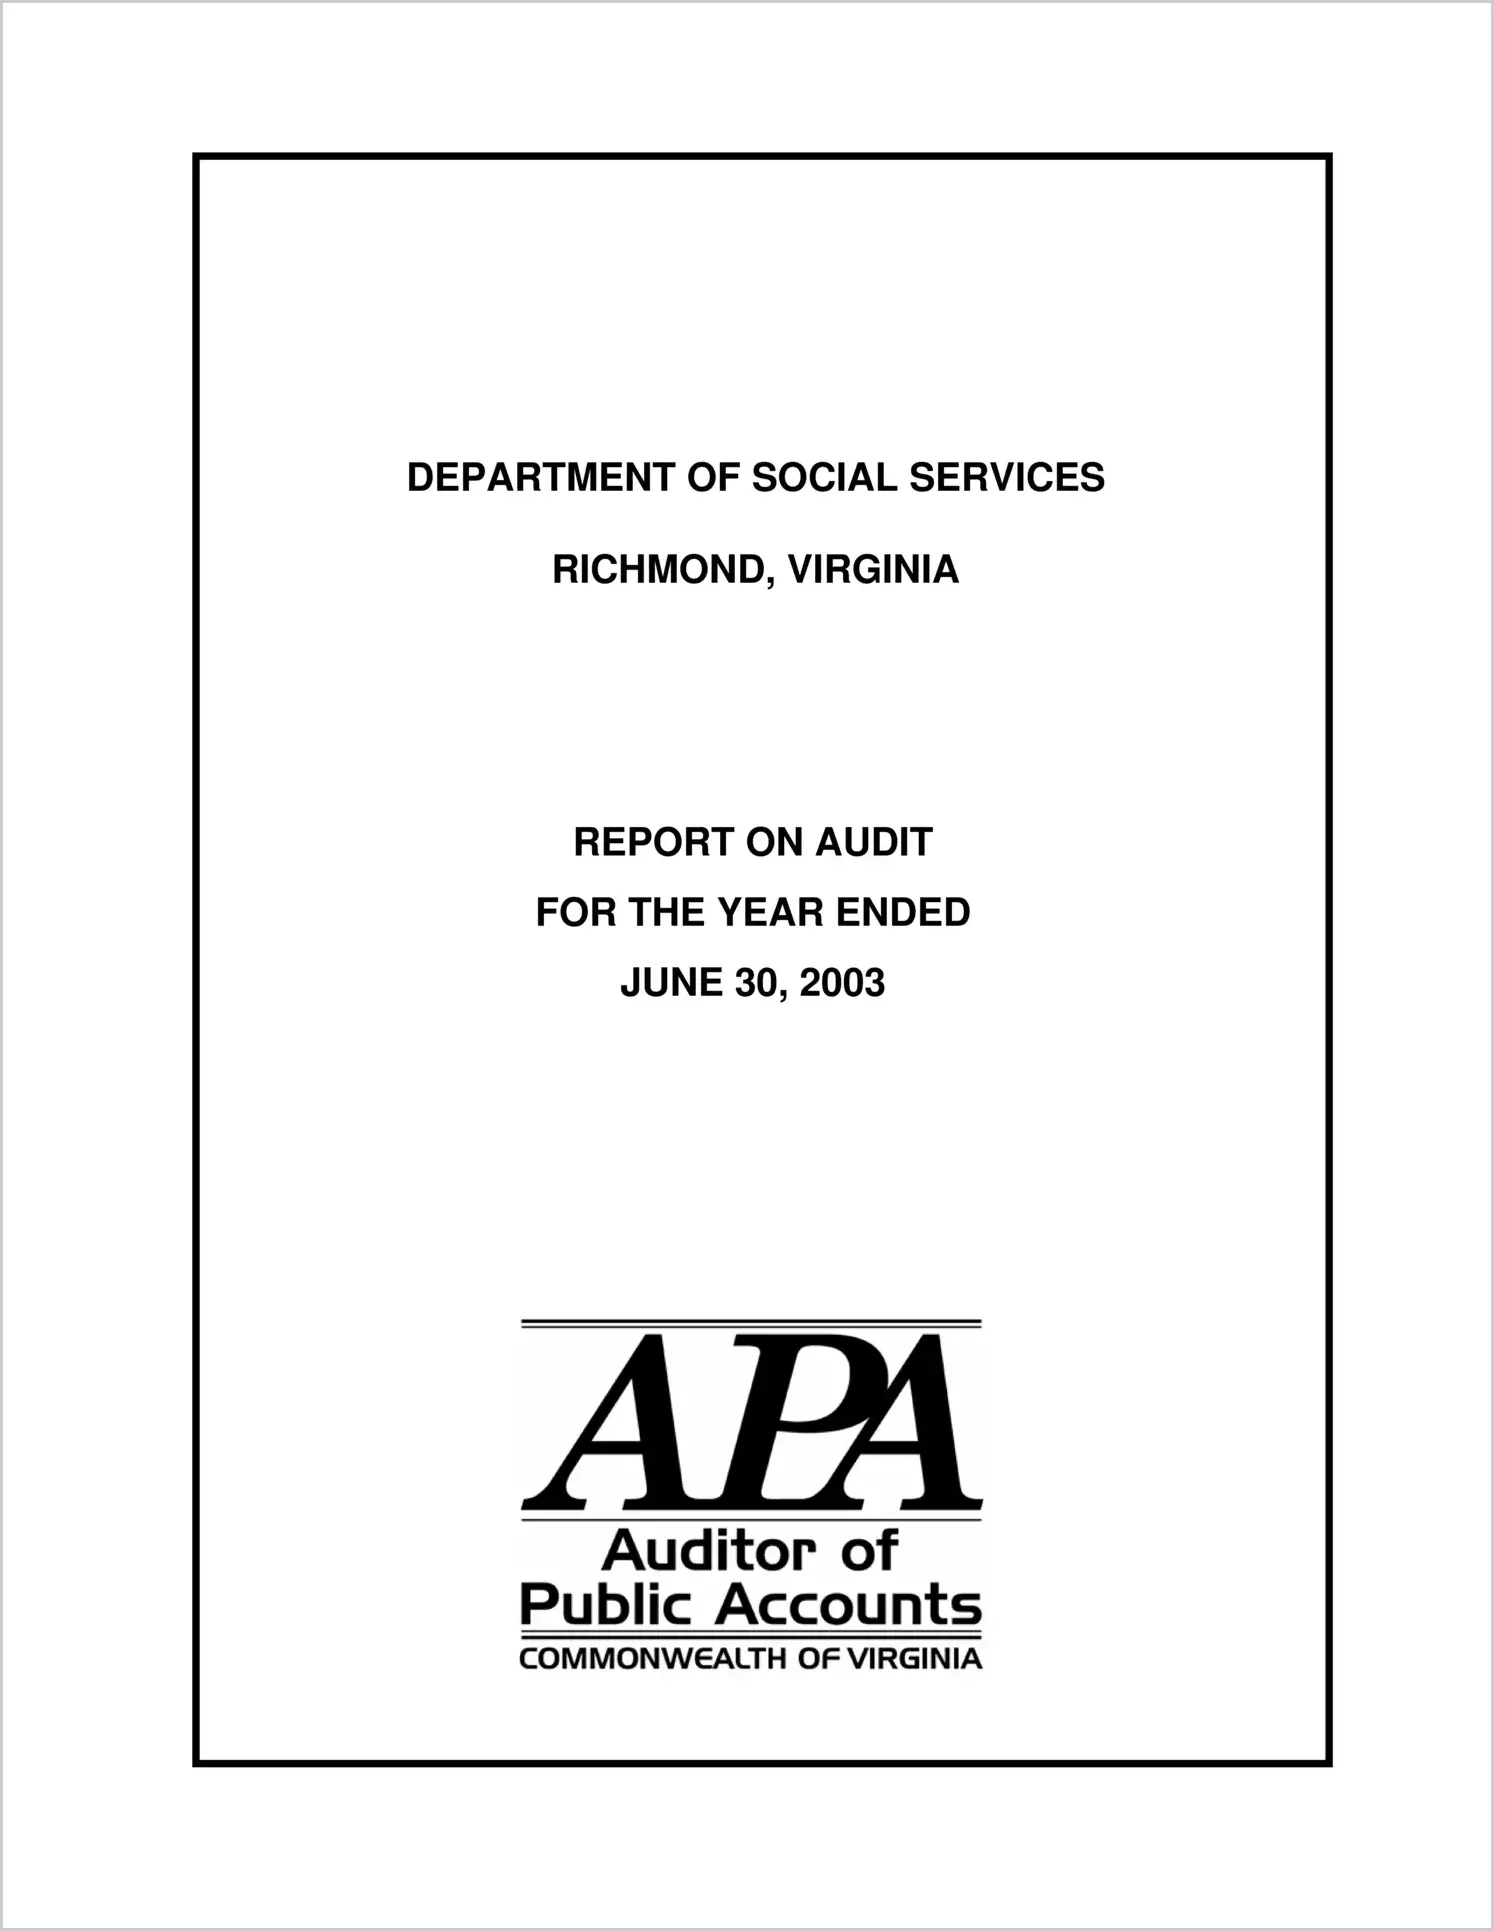 Department of Social Services for the year ended June 30, 2003